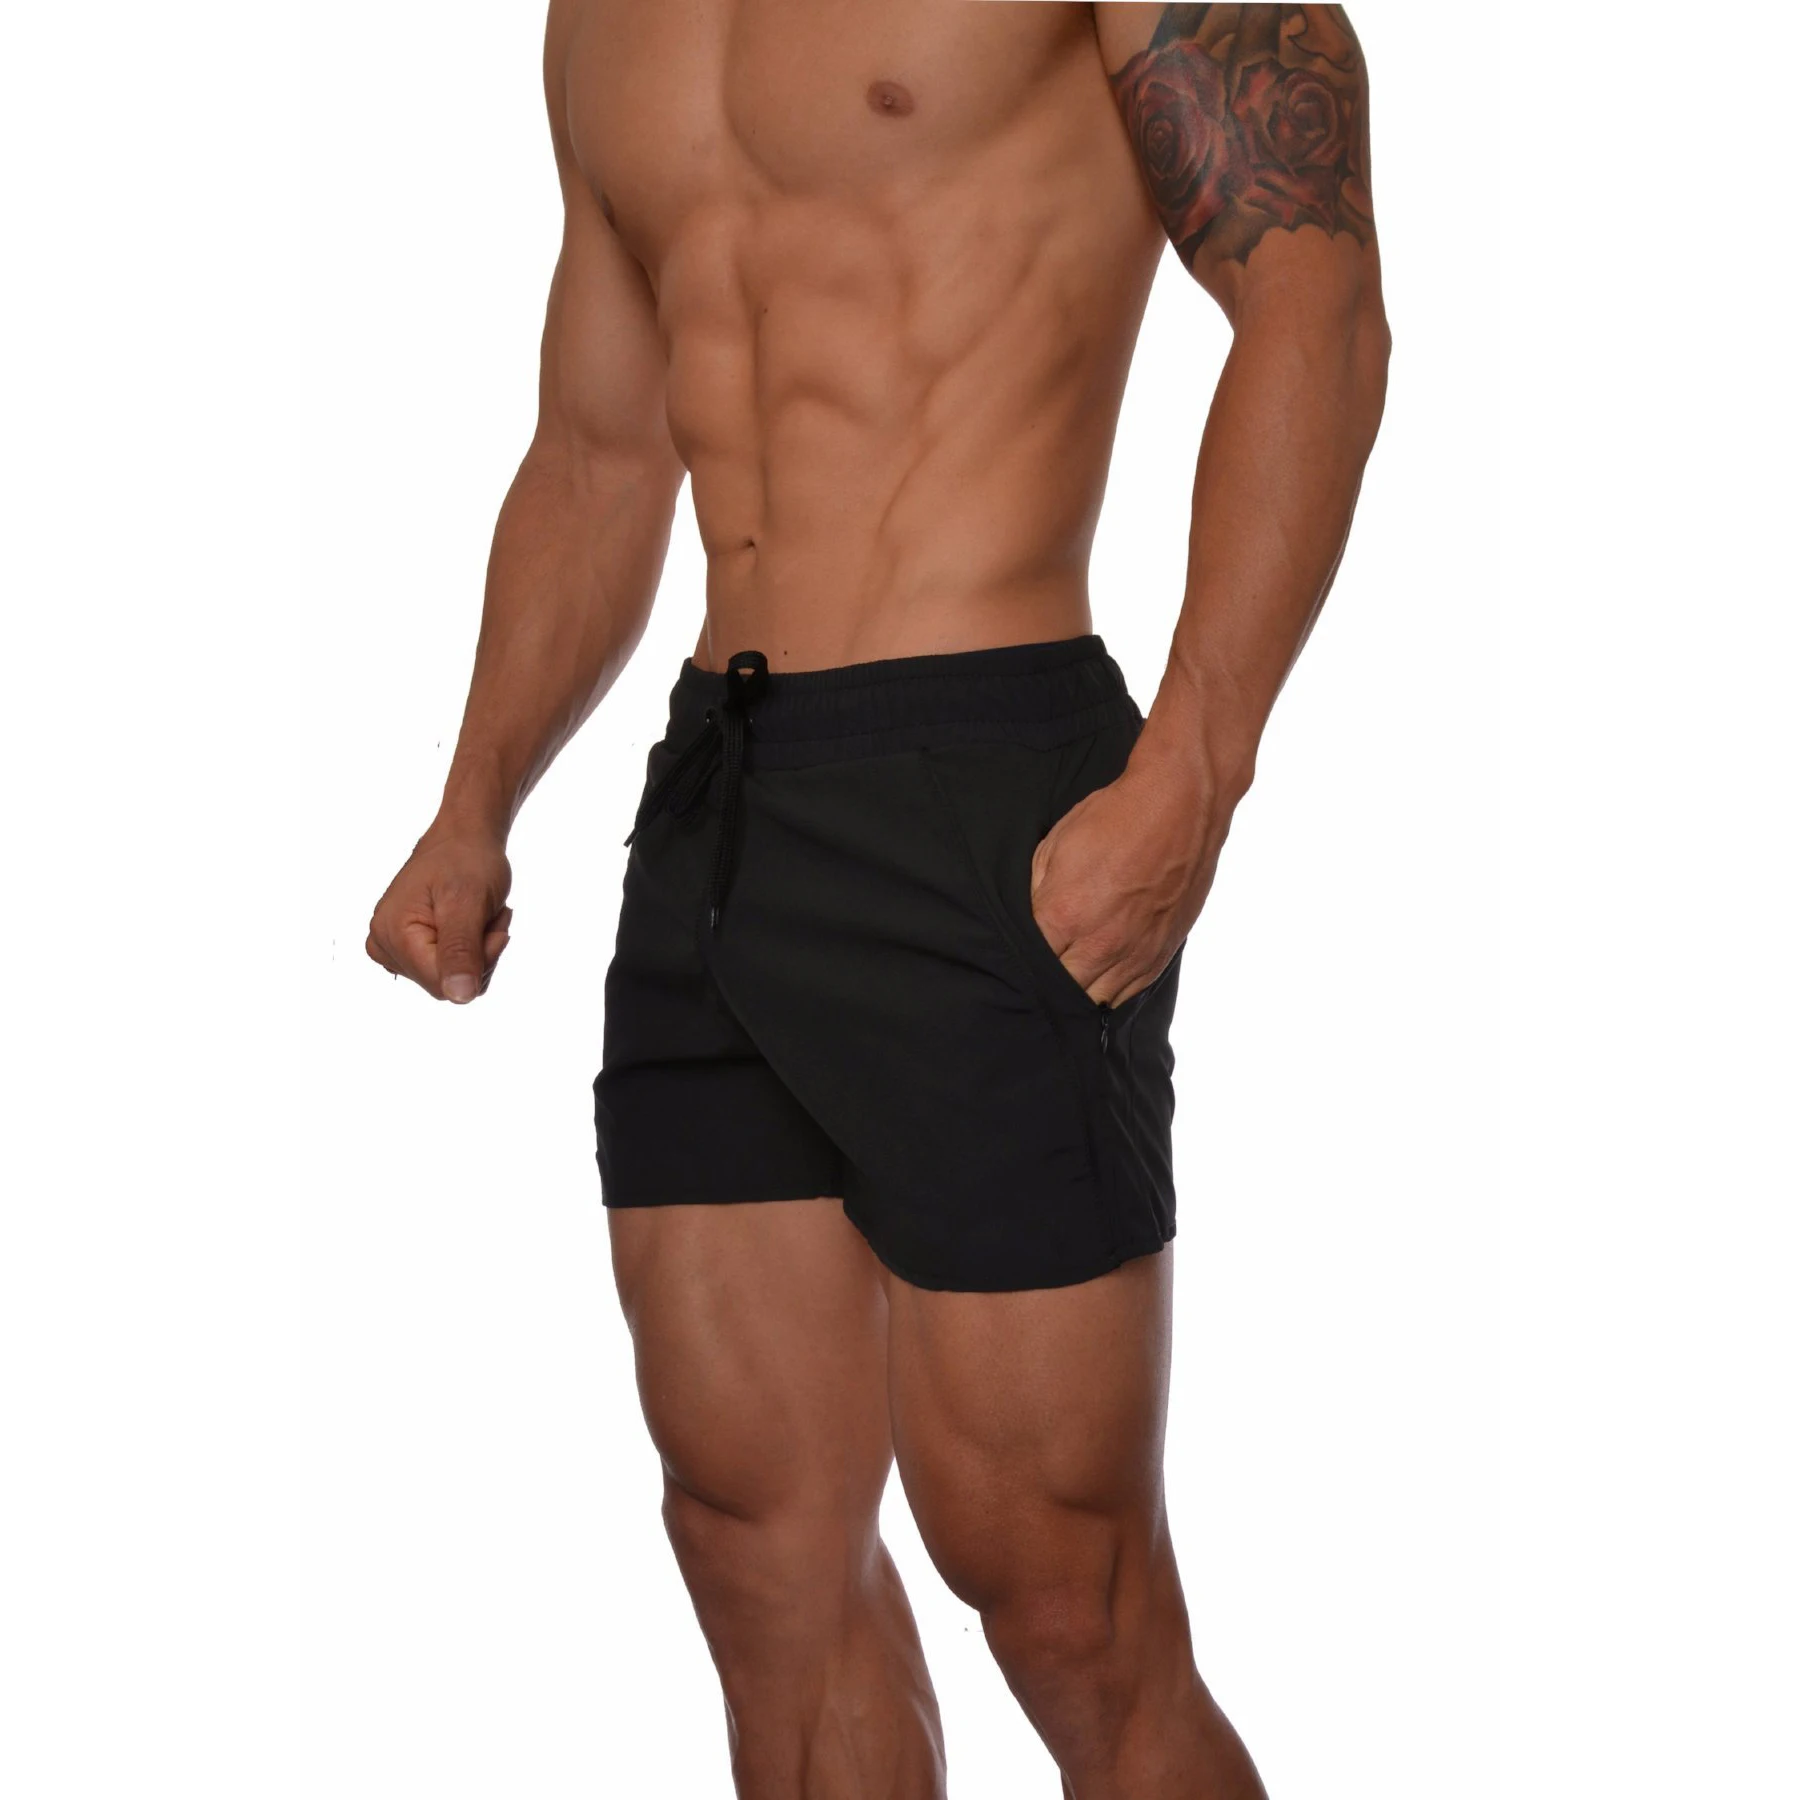 2018 New Arrival Mens Gym Wear Sport Shorts - Buy Mens Gym Wear Product ...